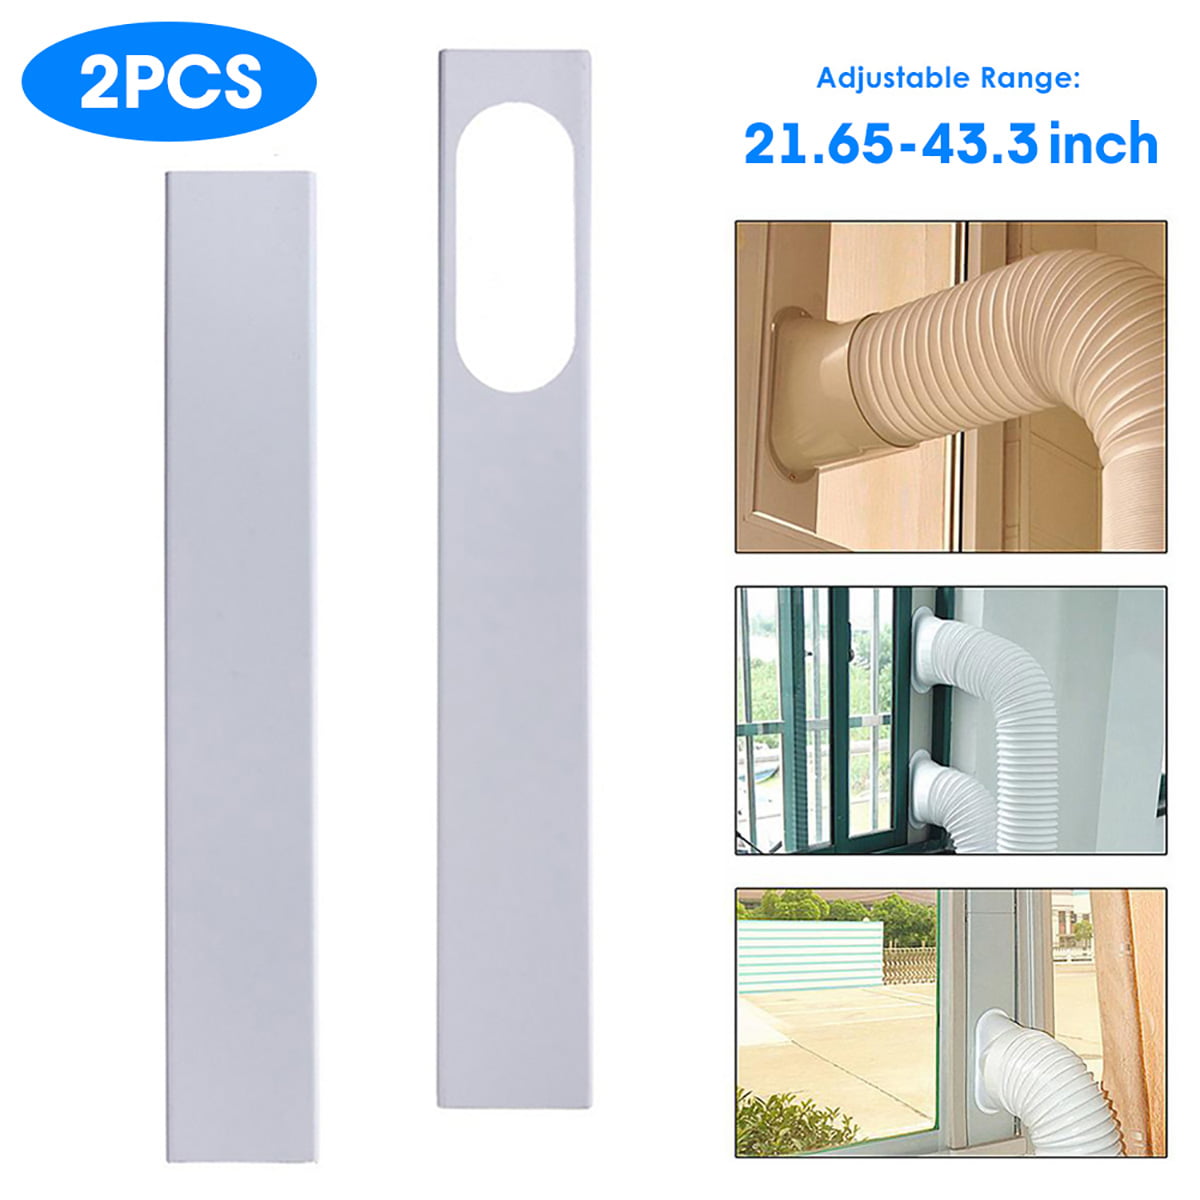 2/3PCS Adjustable Window Slide Kit Plate For Portable Air Conditioner A3 